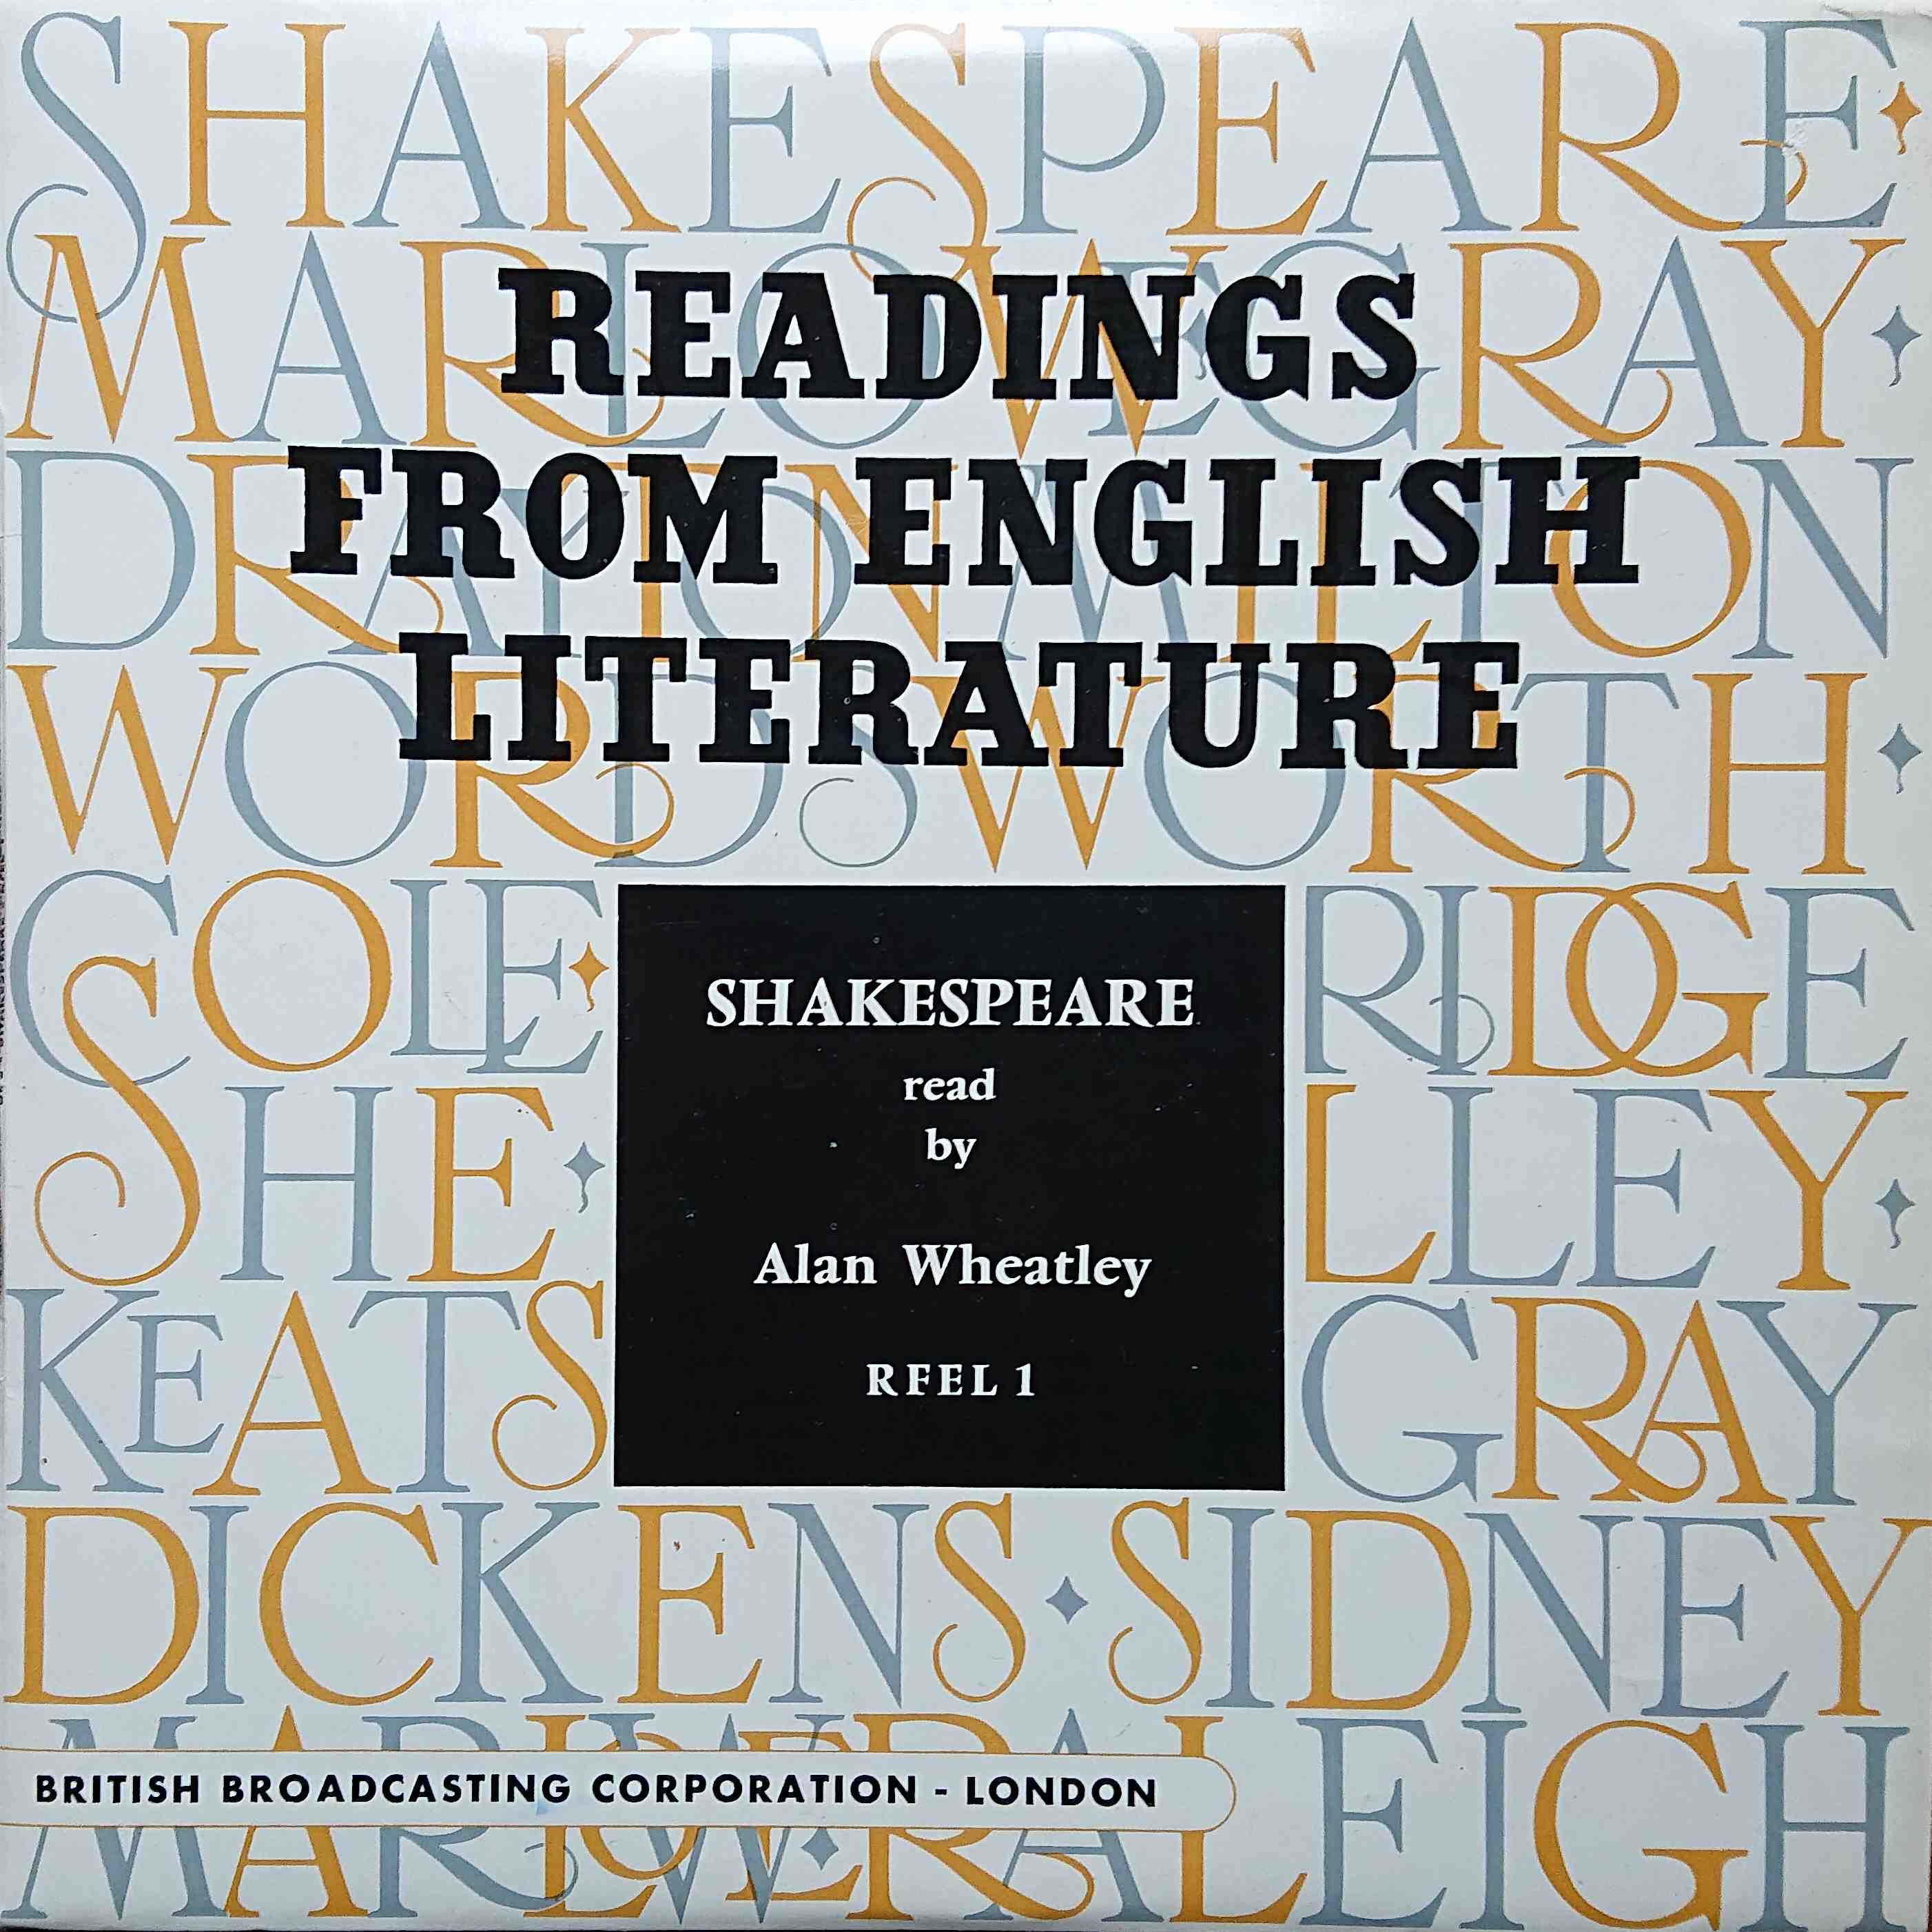 Picture of RFEL 1 Shakespeare  by artist Alan Wheatley from the BBC 10inches - Records and Tapes library